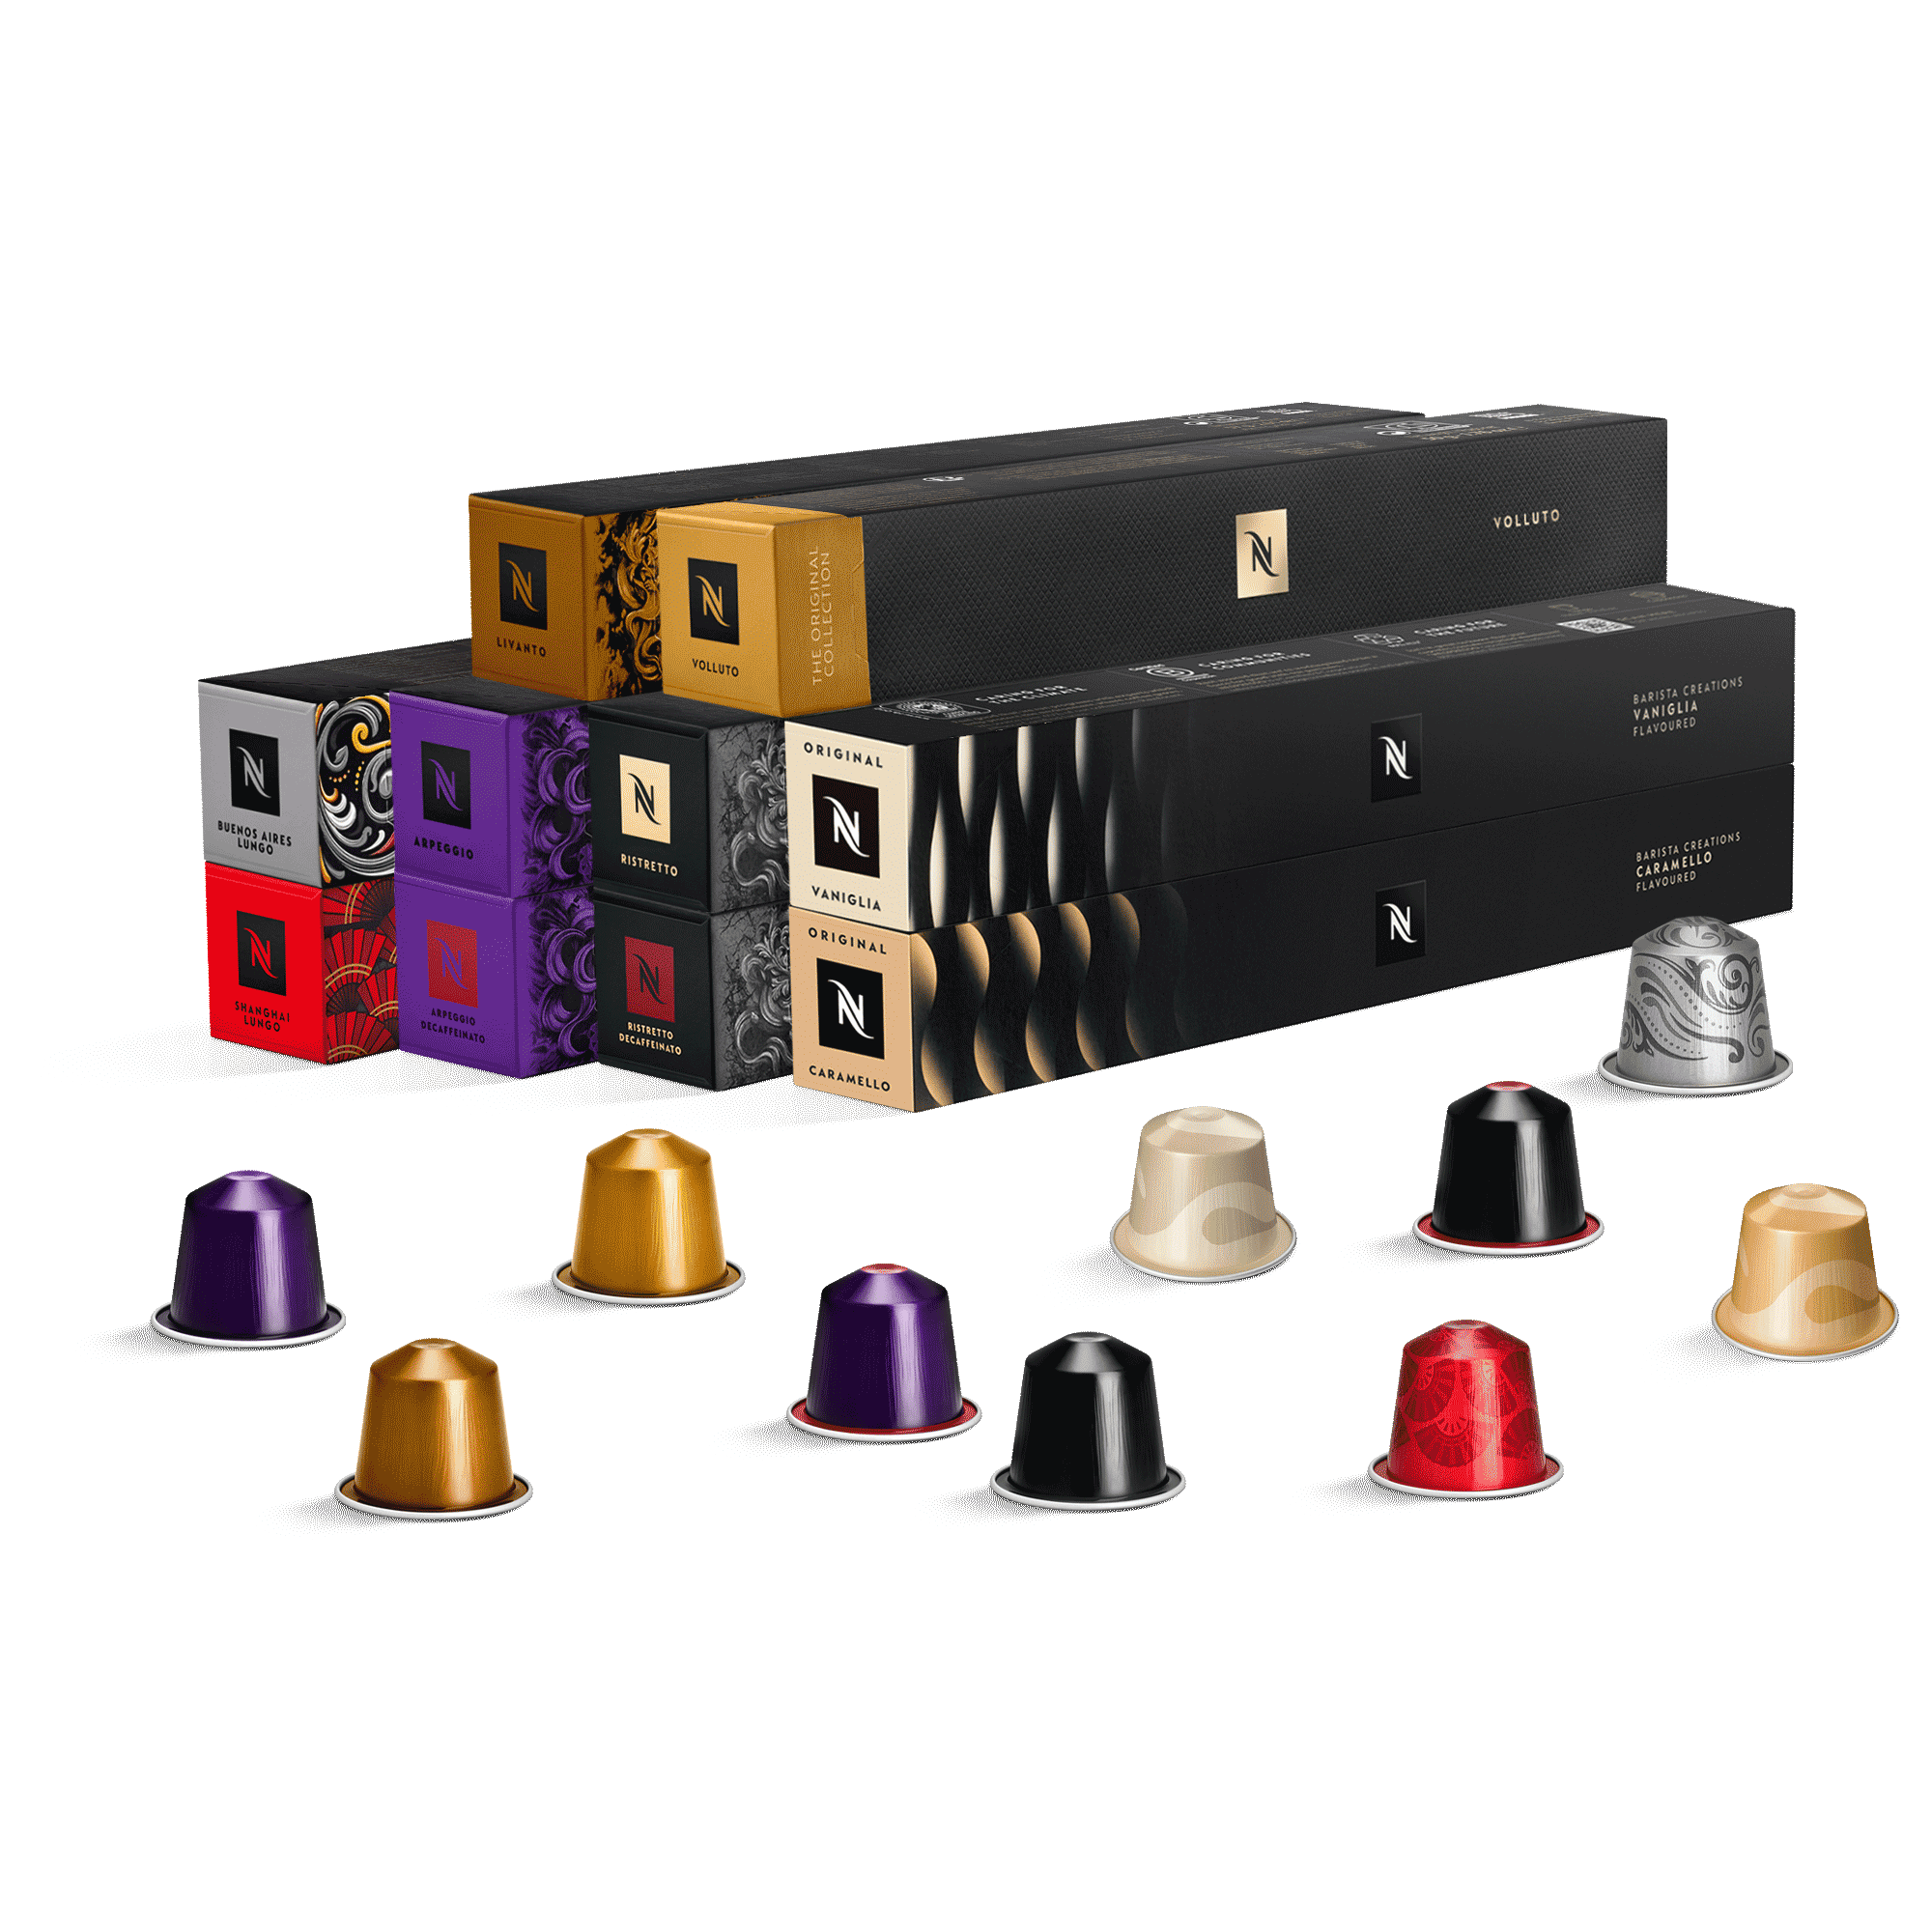 Distributeur 40 capsules type nespresso Ambiance Nature